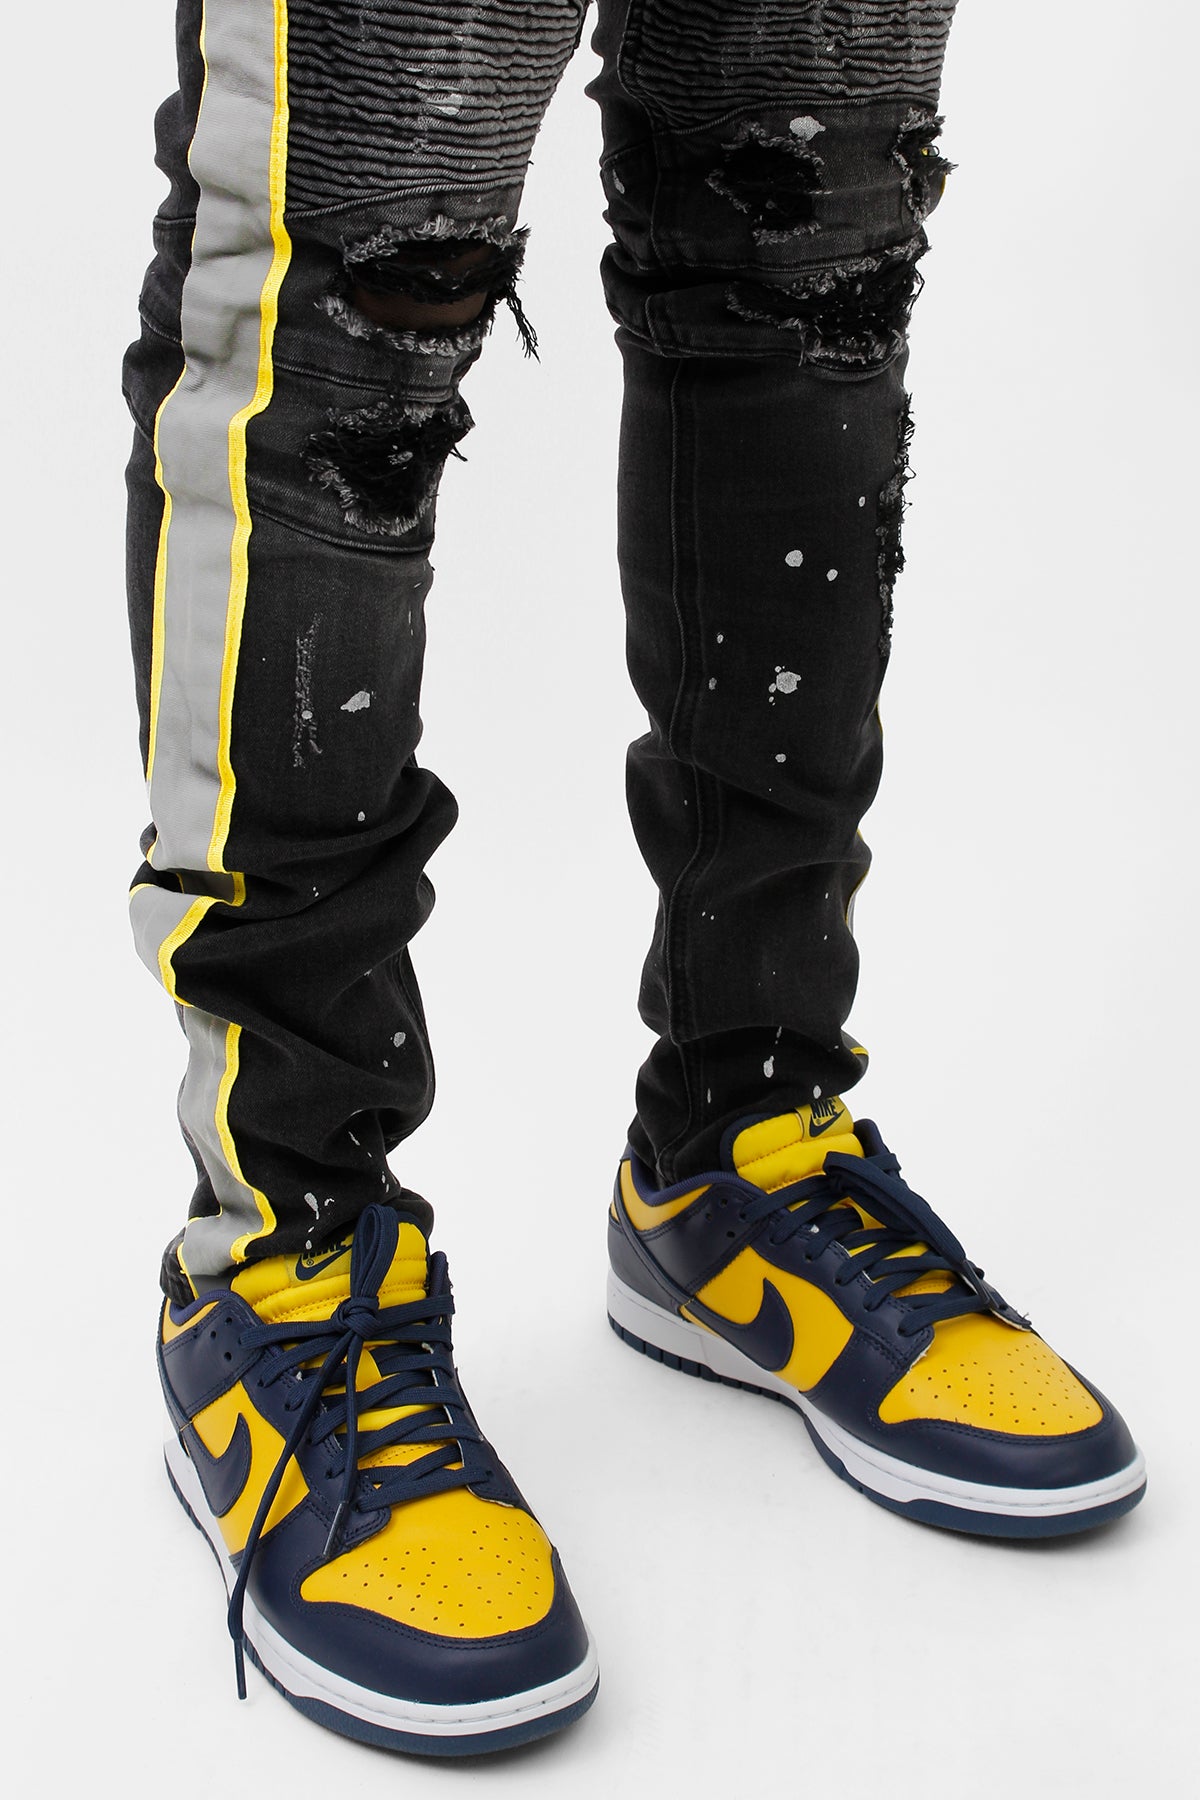 Reflective Taped Moto Jeans (Black) (4905674866790)